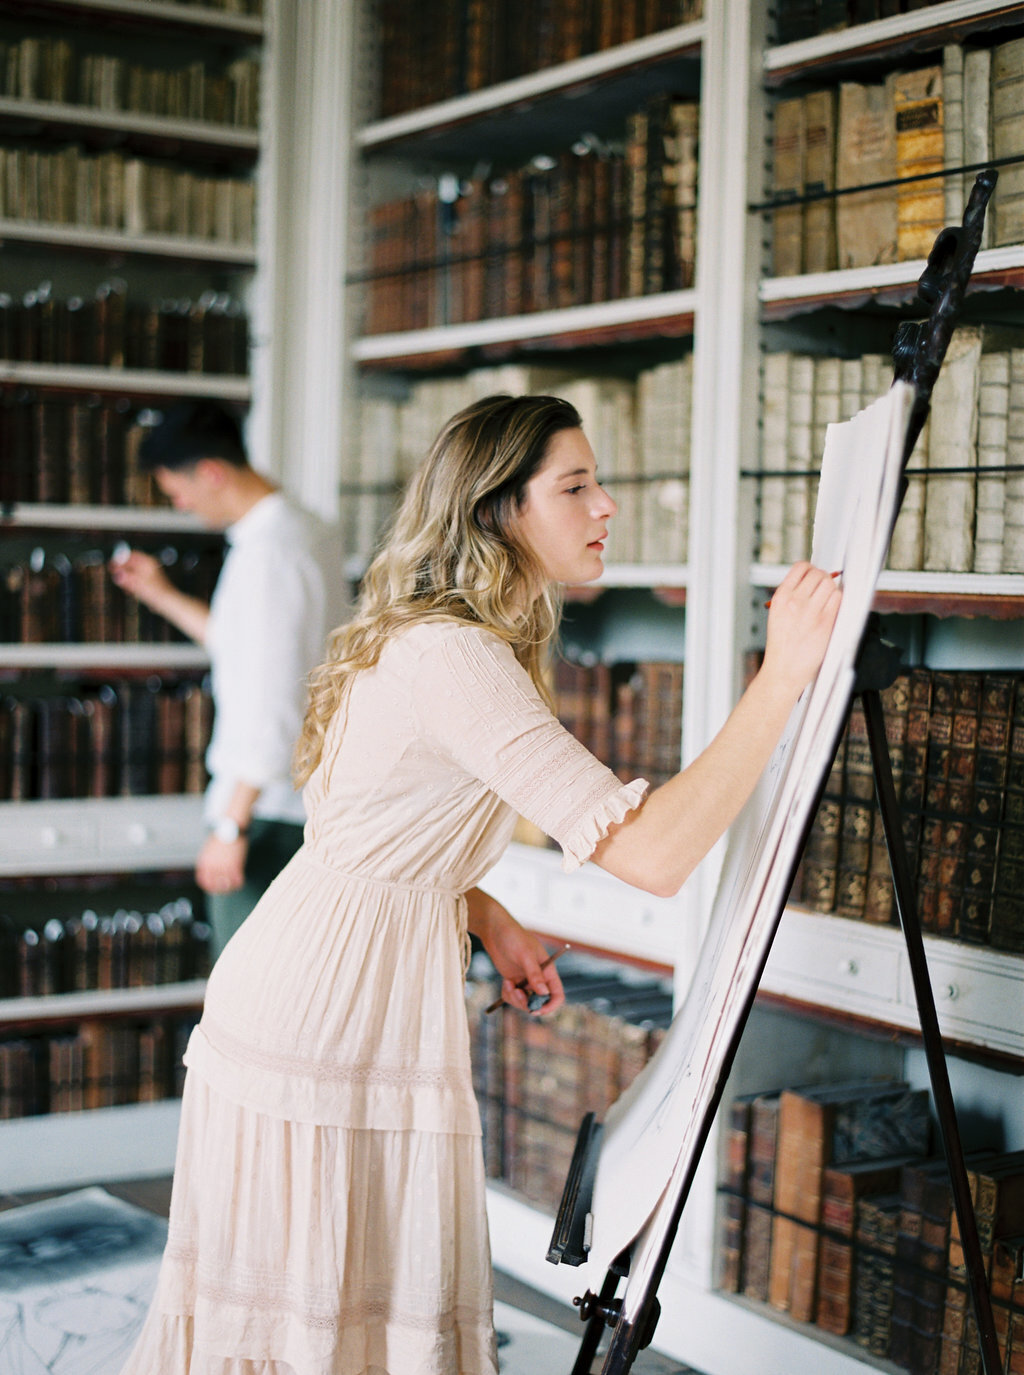 Woman drawing and man looking for a book in old library in Los Angeles